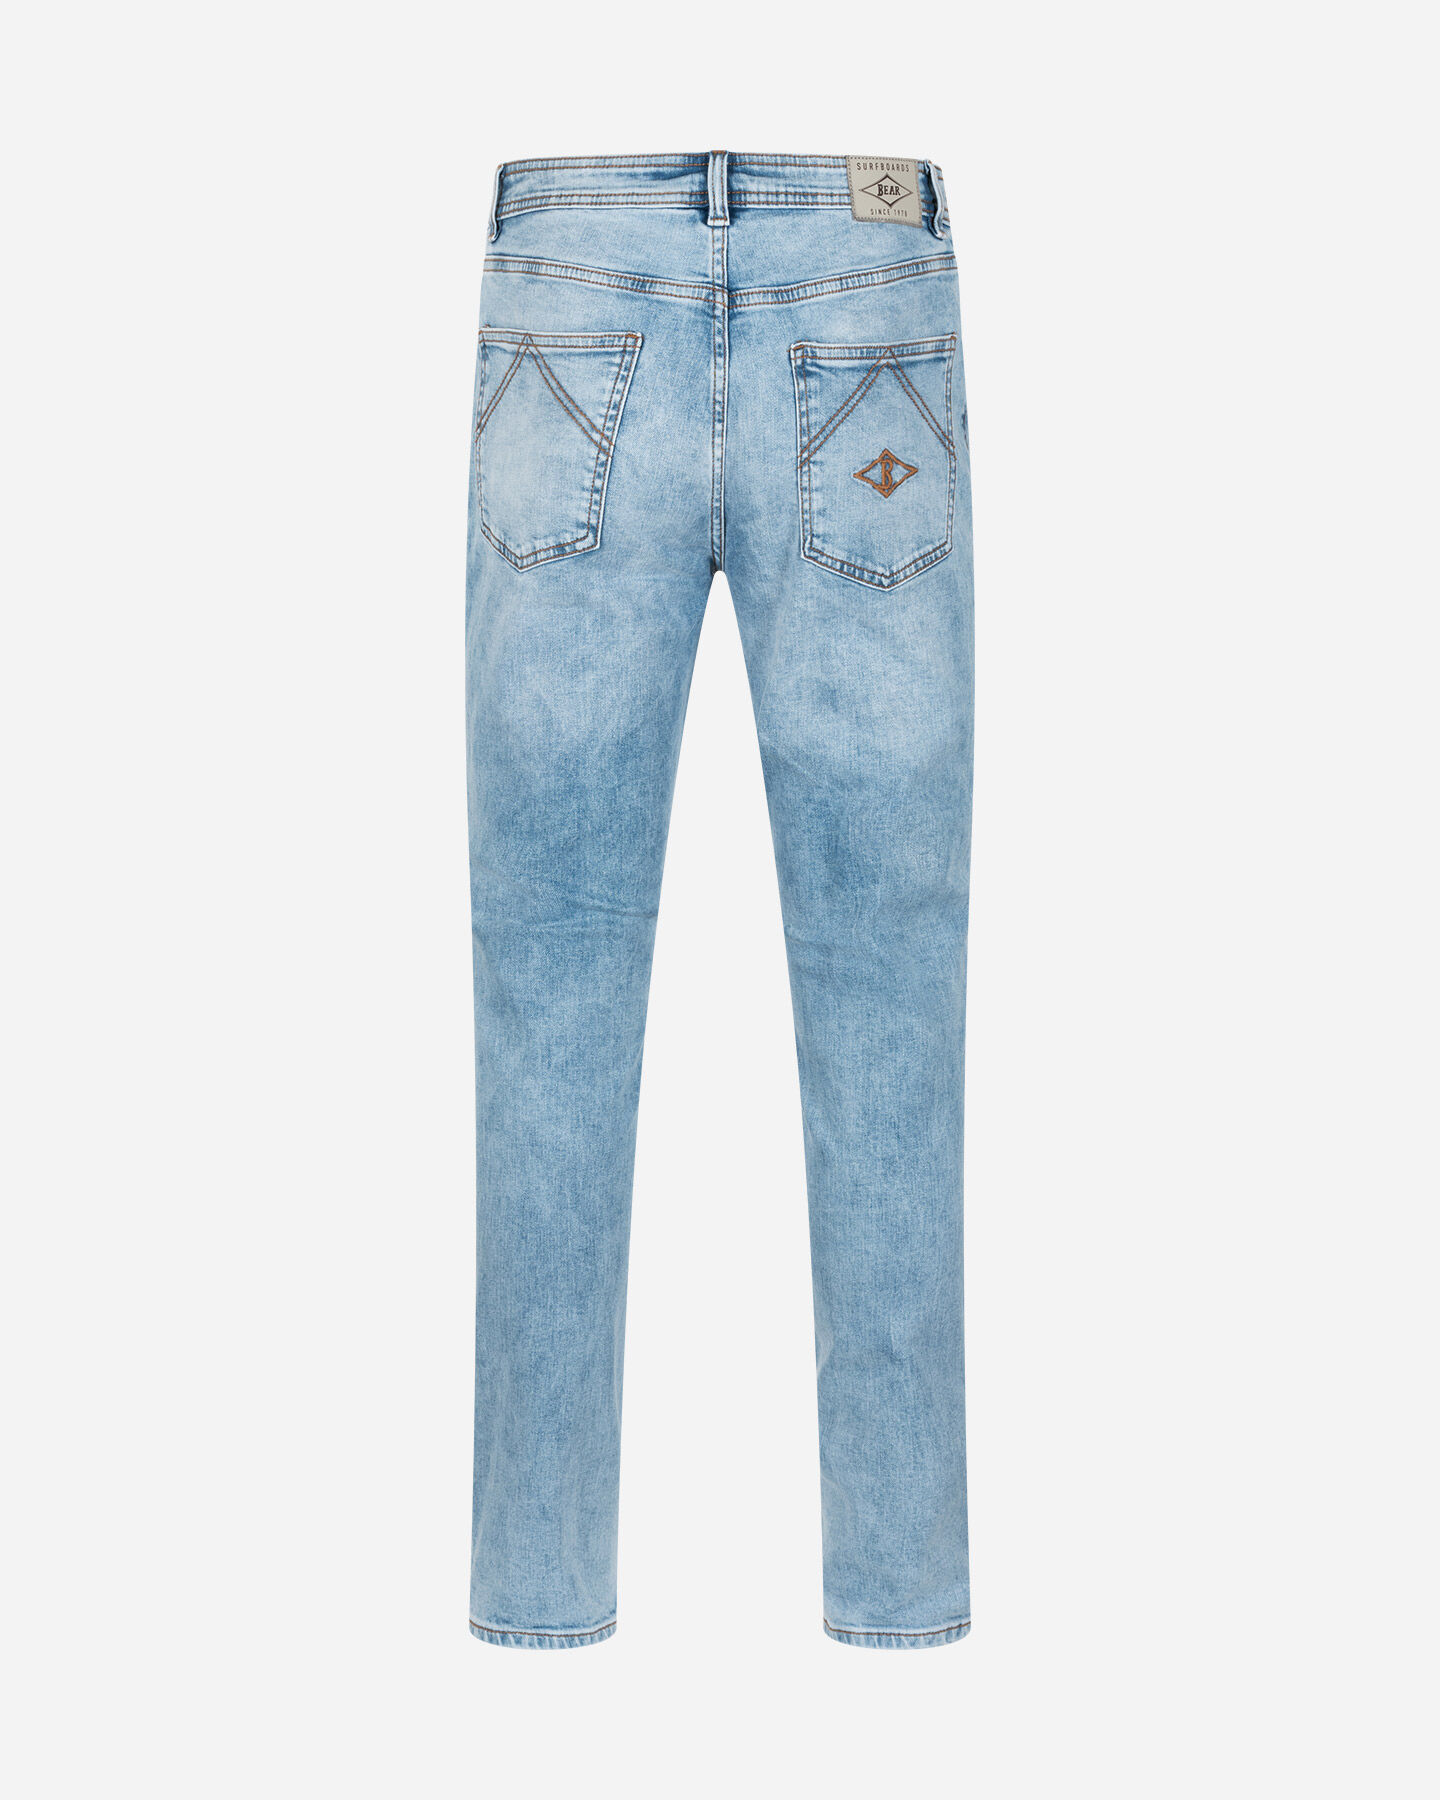  Jeans BEAR HERITAGE M S4131644|LD|44 scatto 1